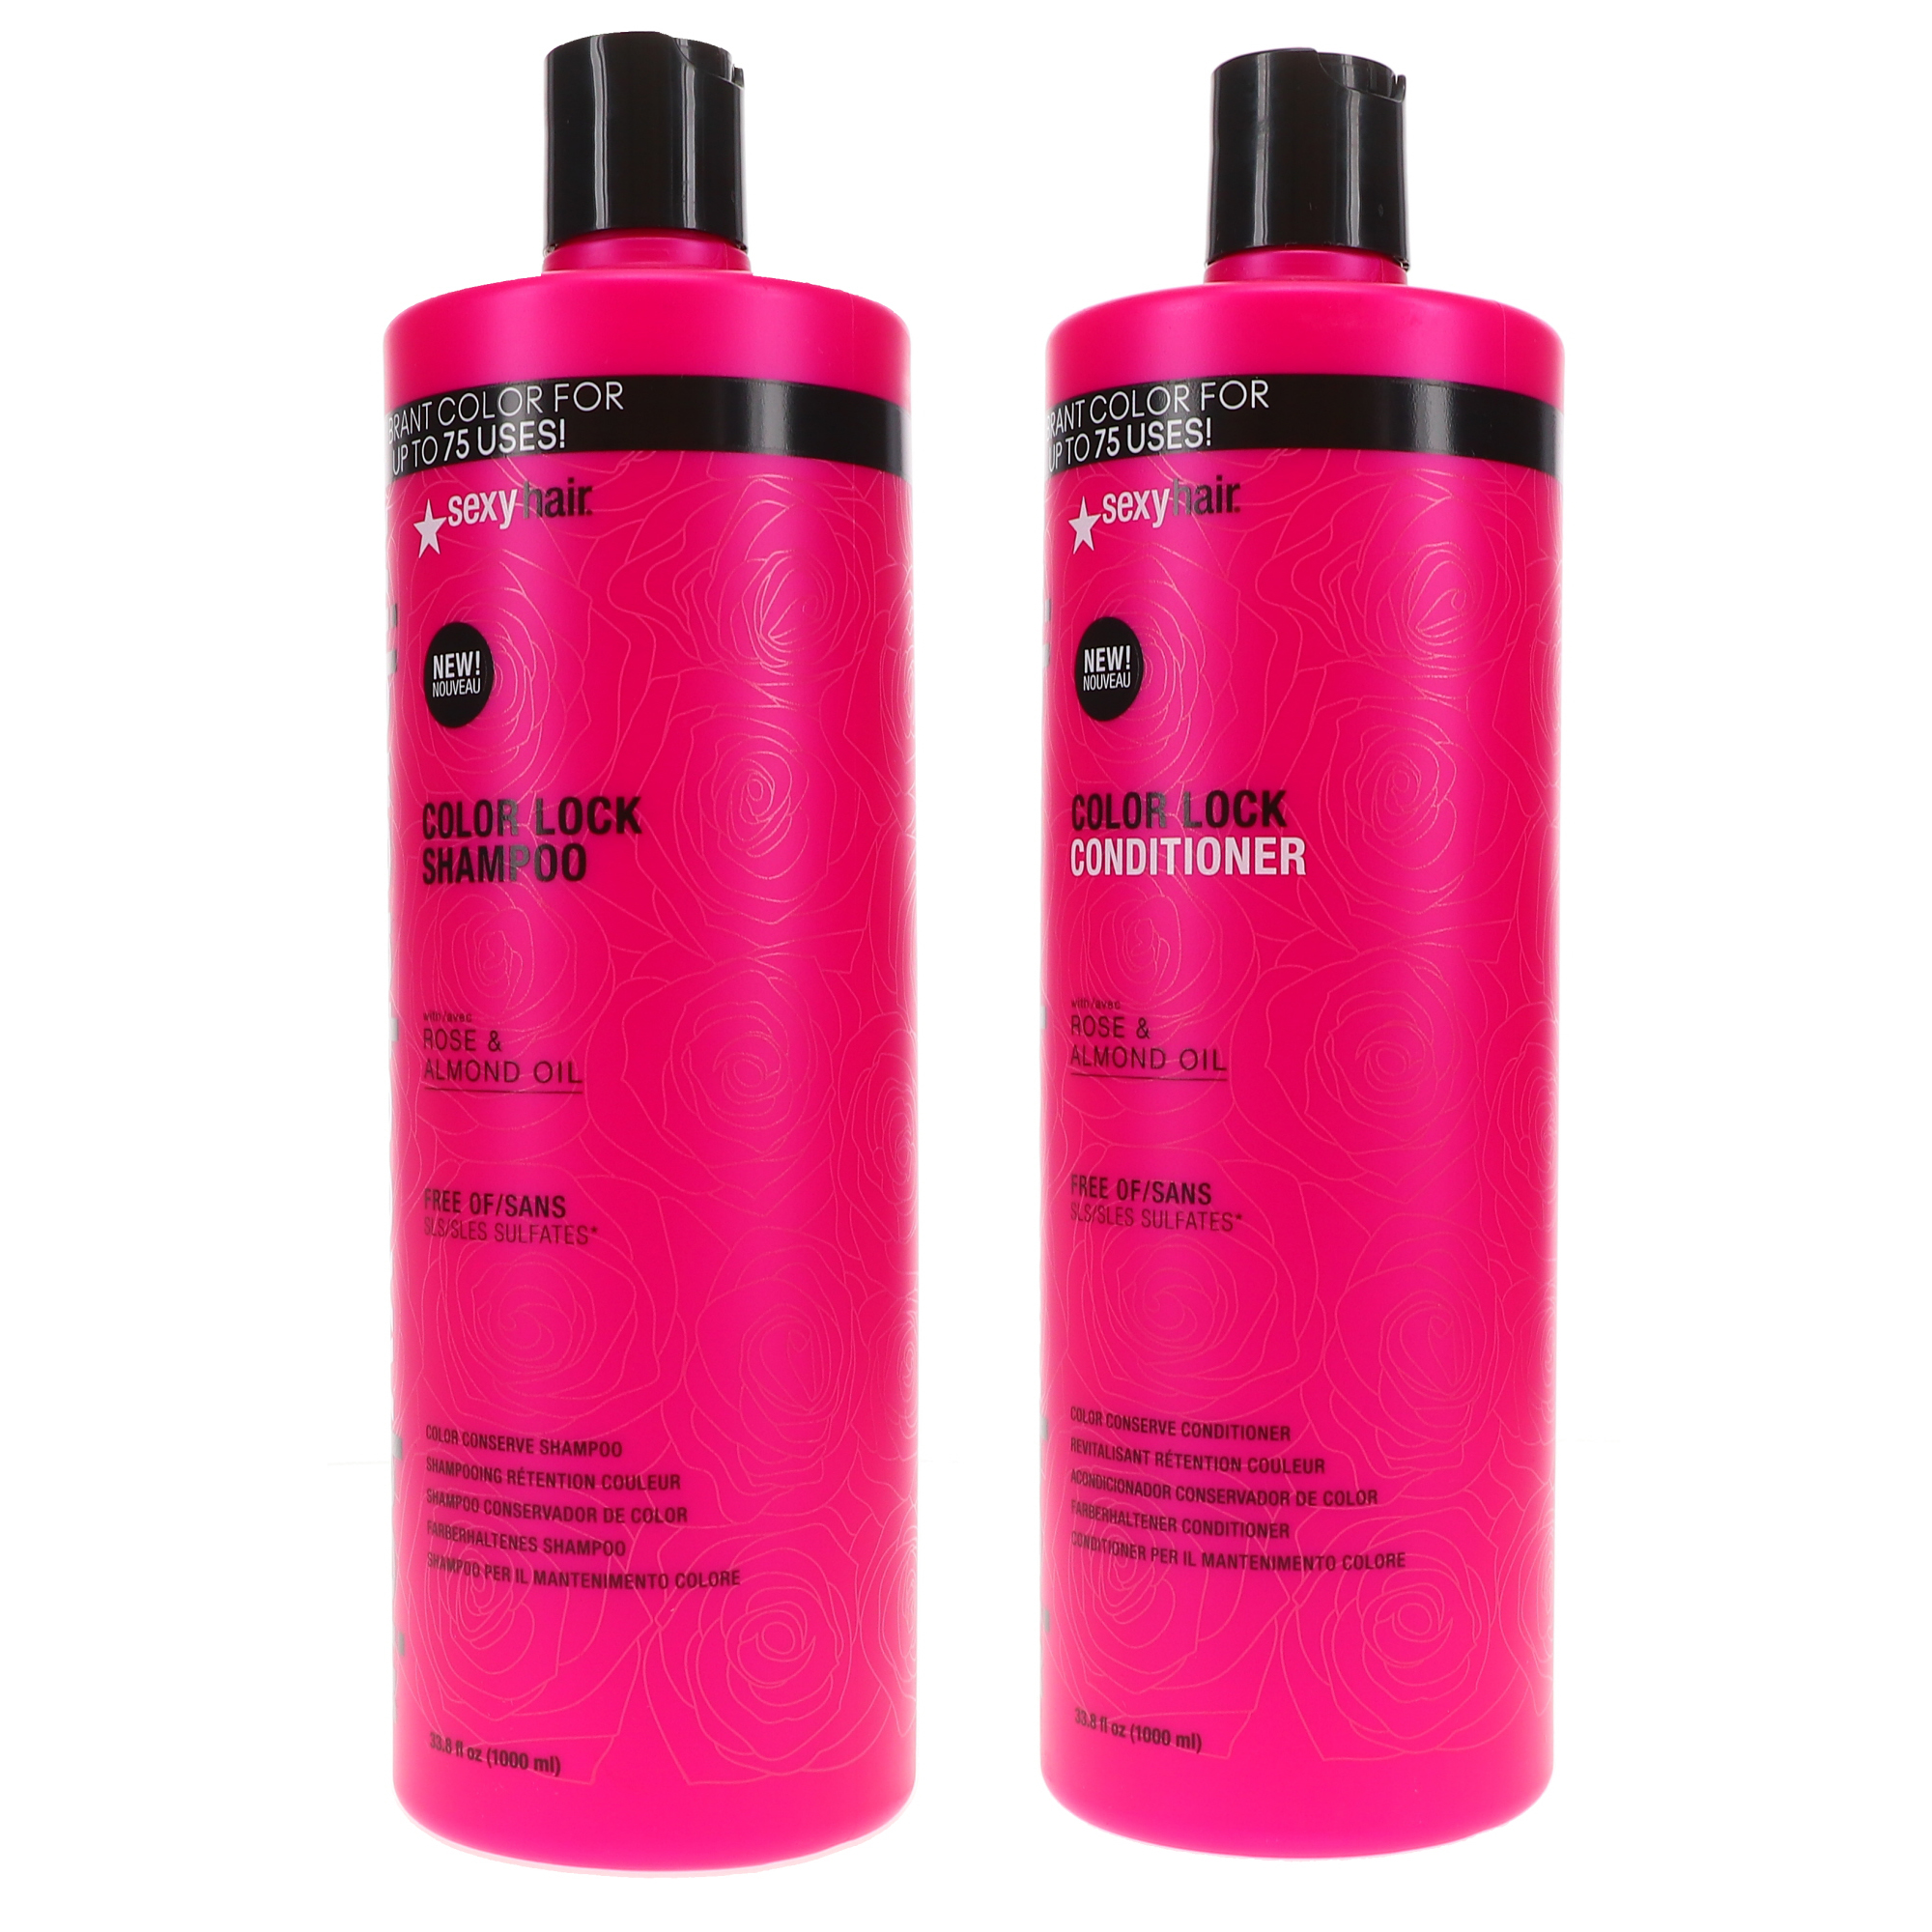 Sexy Hair Vibrant Sexy Hair Color Lock Shampoo 338 Oz And Color Lock Conditioner 338 Oz Combo 0290